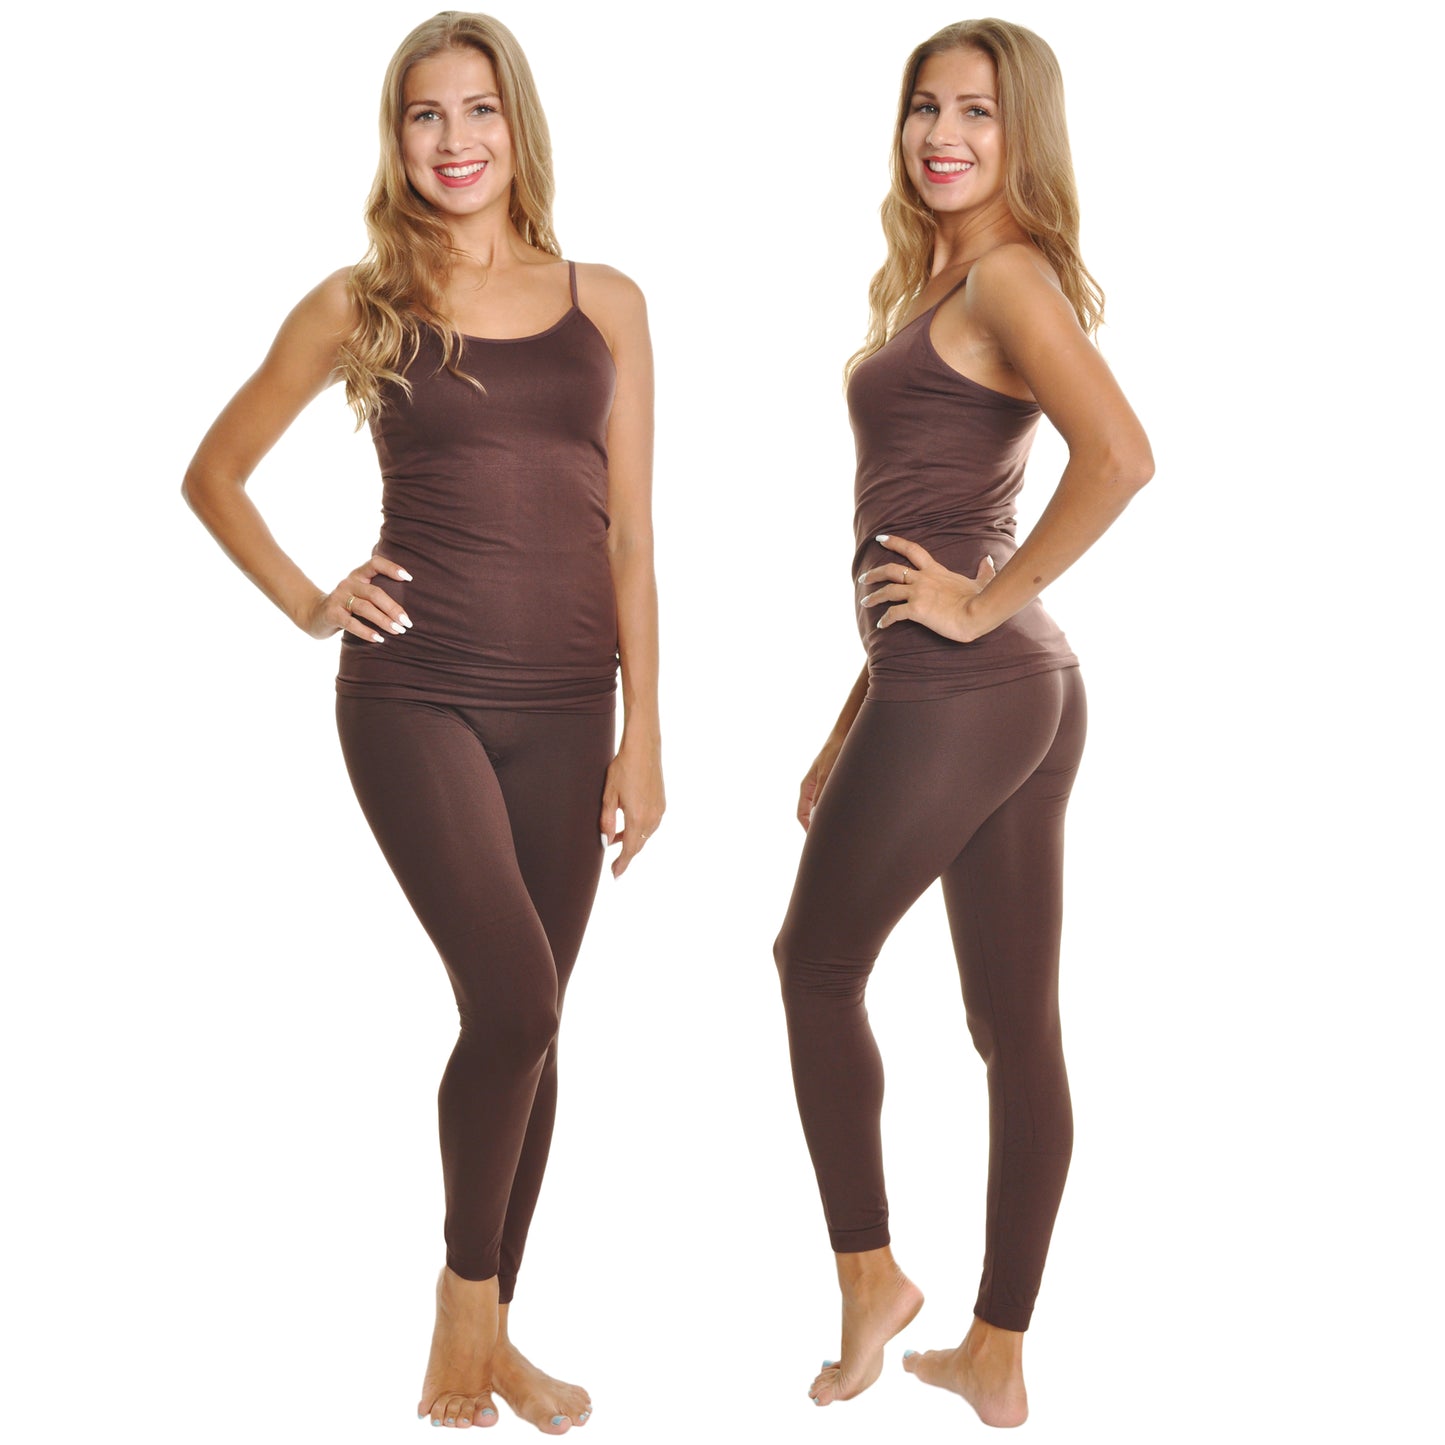 Seamless Microfiber Top and Bottom Layering Sets (4-Pack)